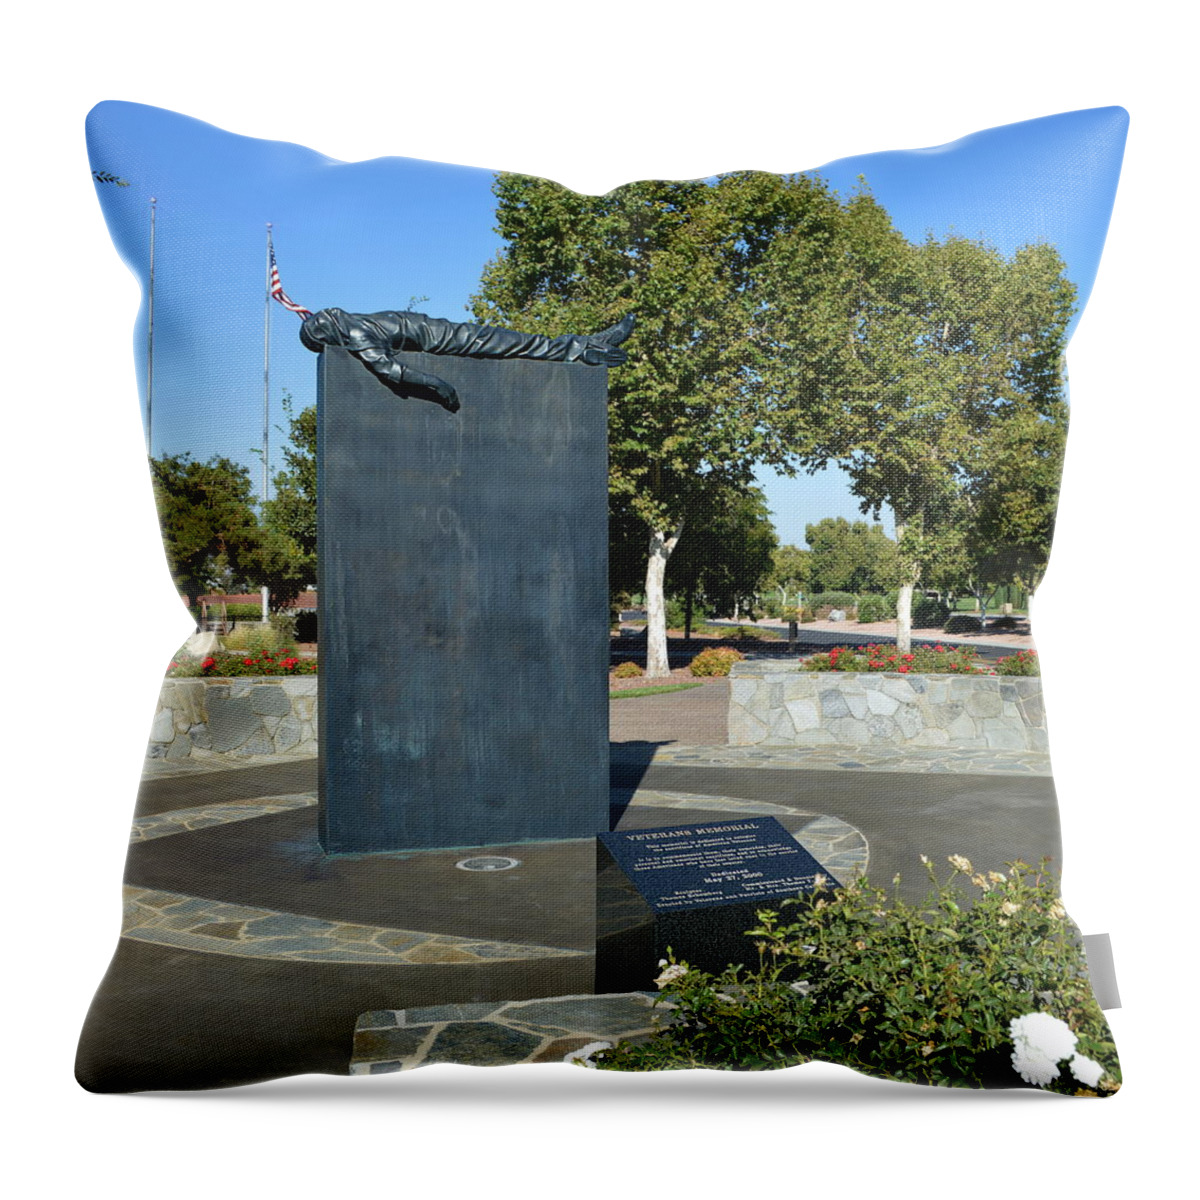 Memorial Throw Pillow featuring the photograph Veterans Memorial - Riverside by Glenn McCarthy Art and Photography